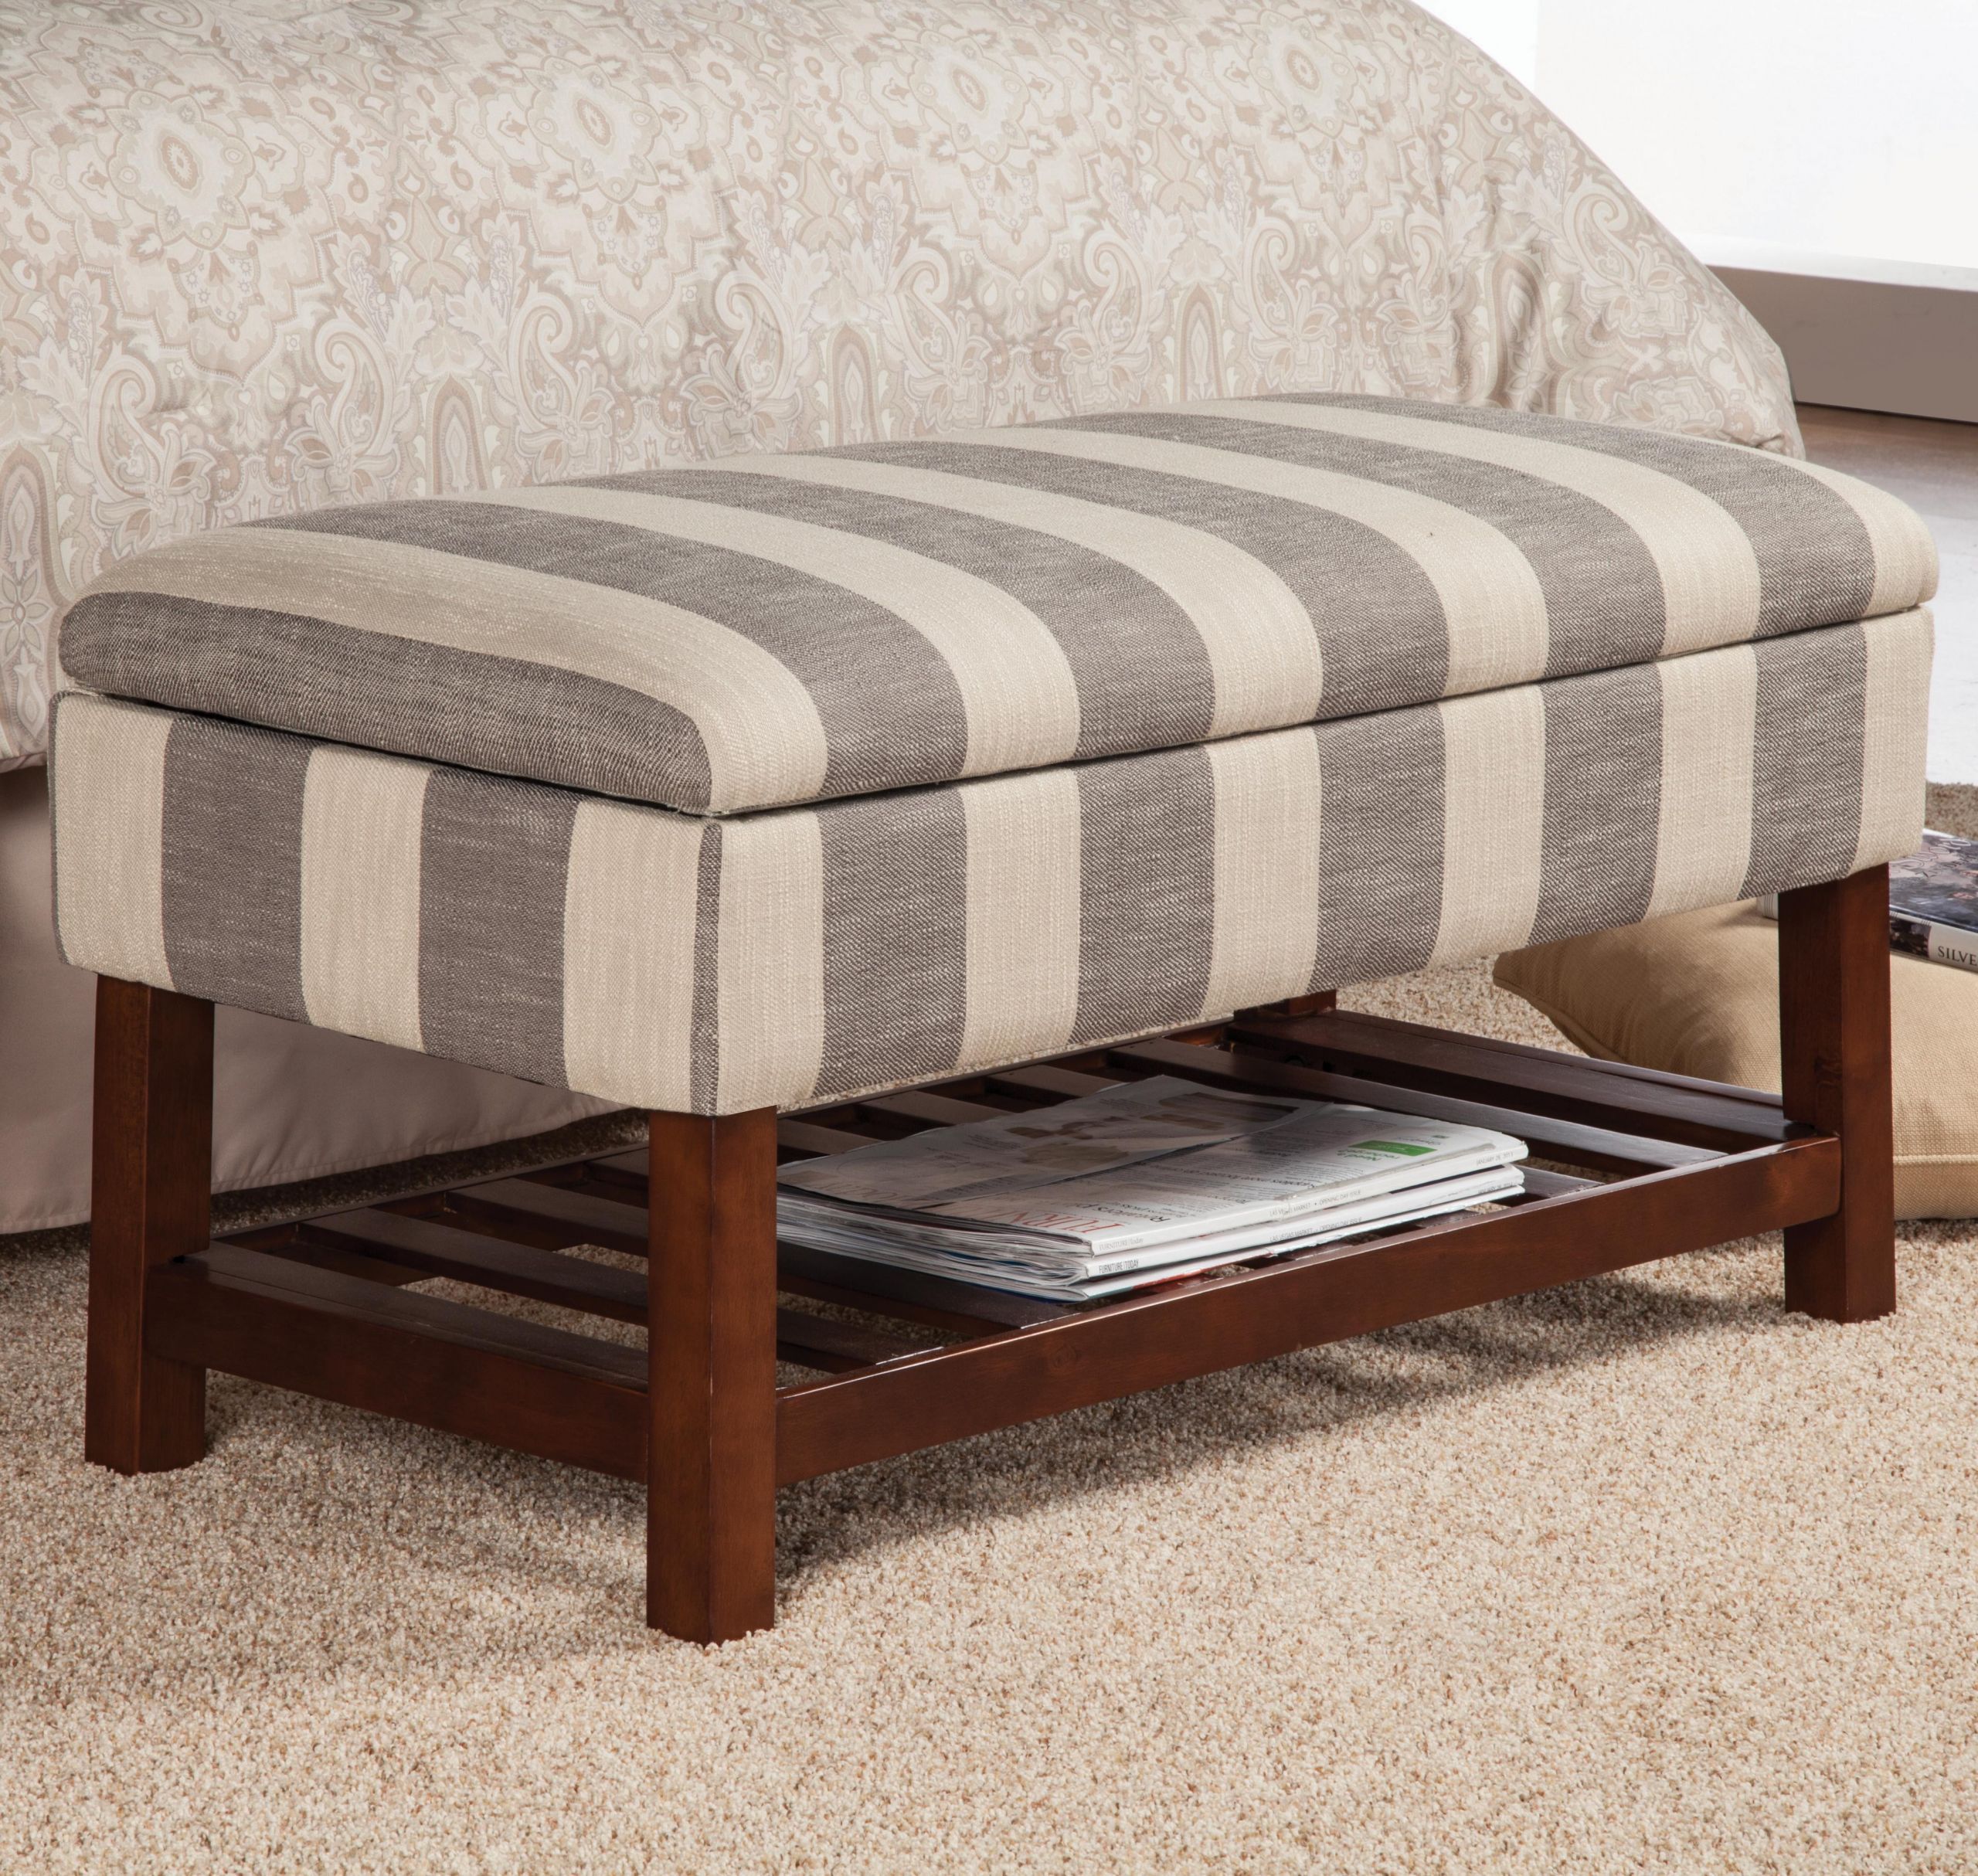 Fabric Bench With Storage
 Benches Storage Bench in Stripe Fabric with Slate Shelf